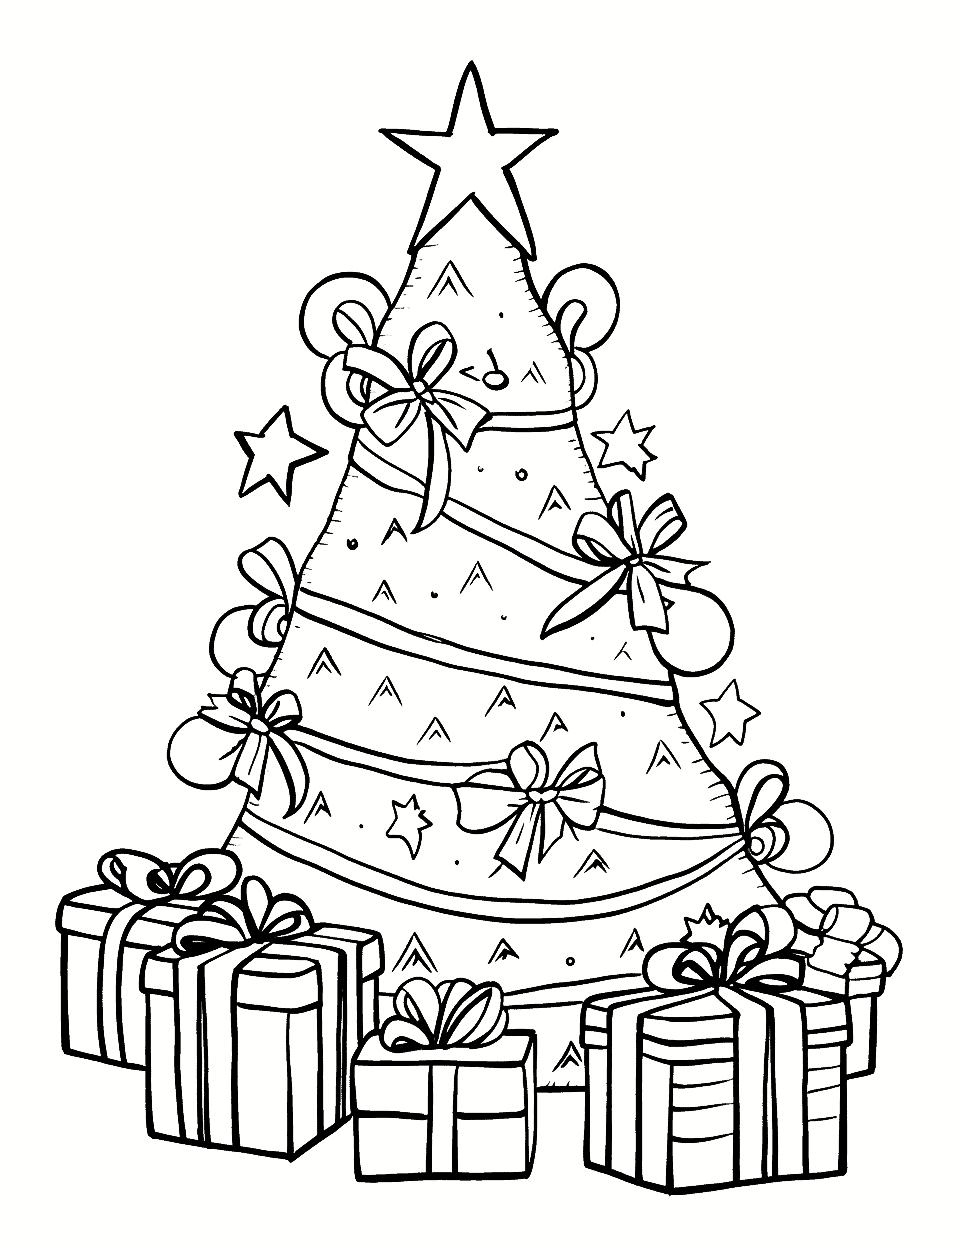 Presents Under the Tree Christmas Coloring Page - Presents of all shapes and sizes under a beautifully decorated Christmas tree.